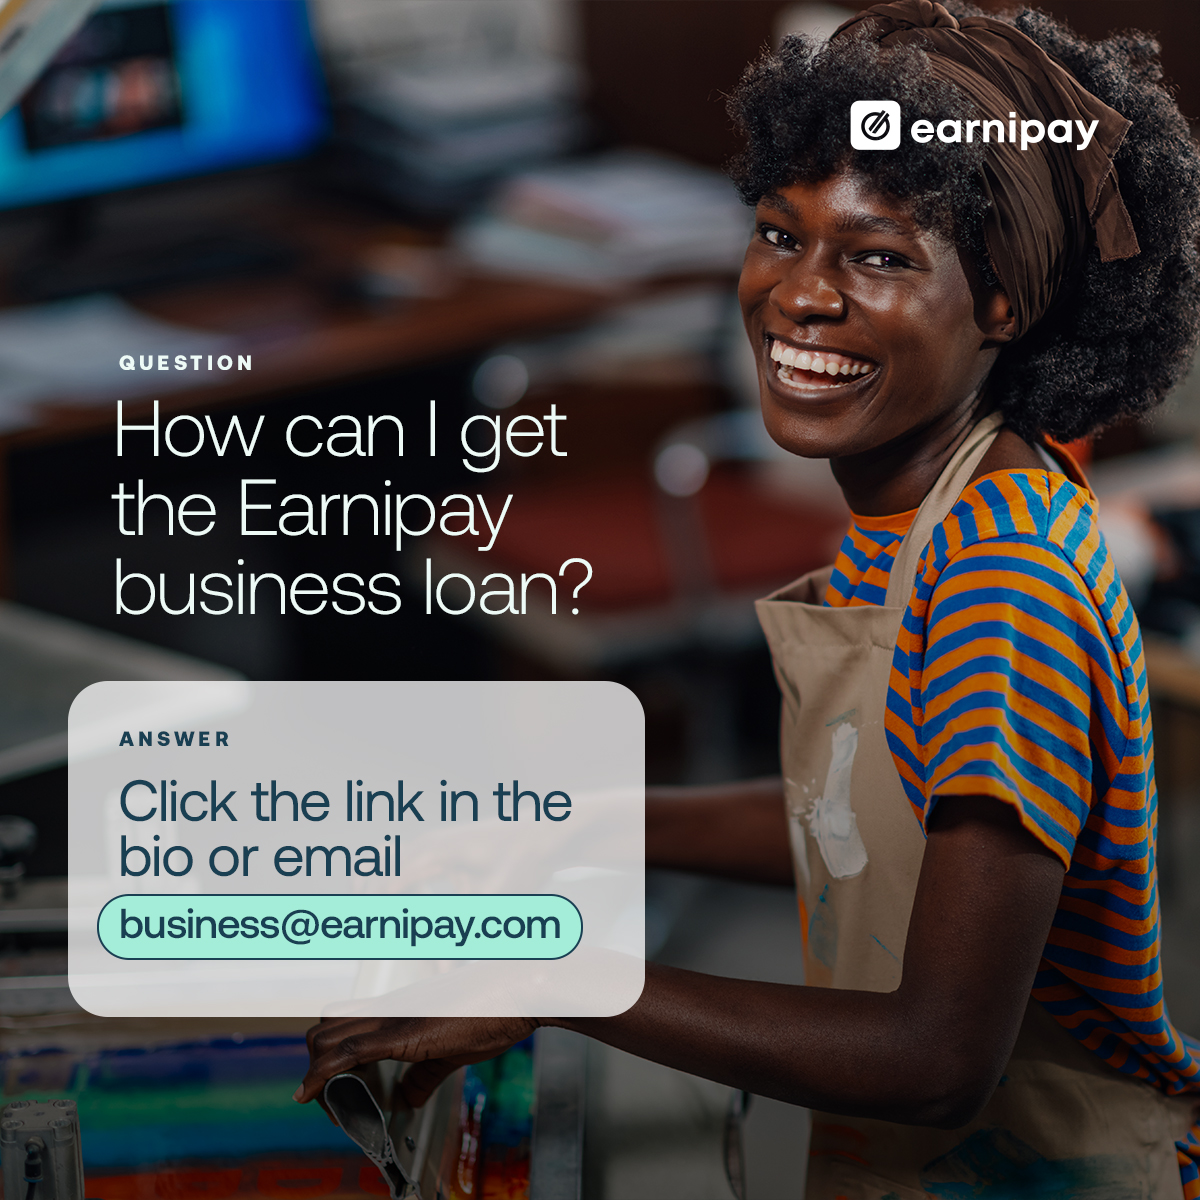 Don't let a tough economy clip your business wings! Earnipay offers accessible business loans with competitive interest rates and flexible repayment plans. Fuel your growth with the financial support you need. Click the link in bio or email us to get started! #SMEs #Earnipay…